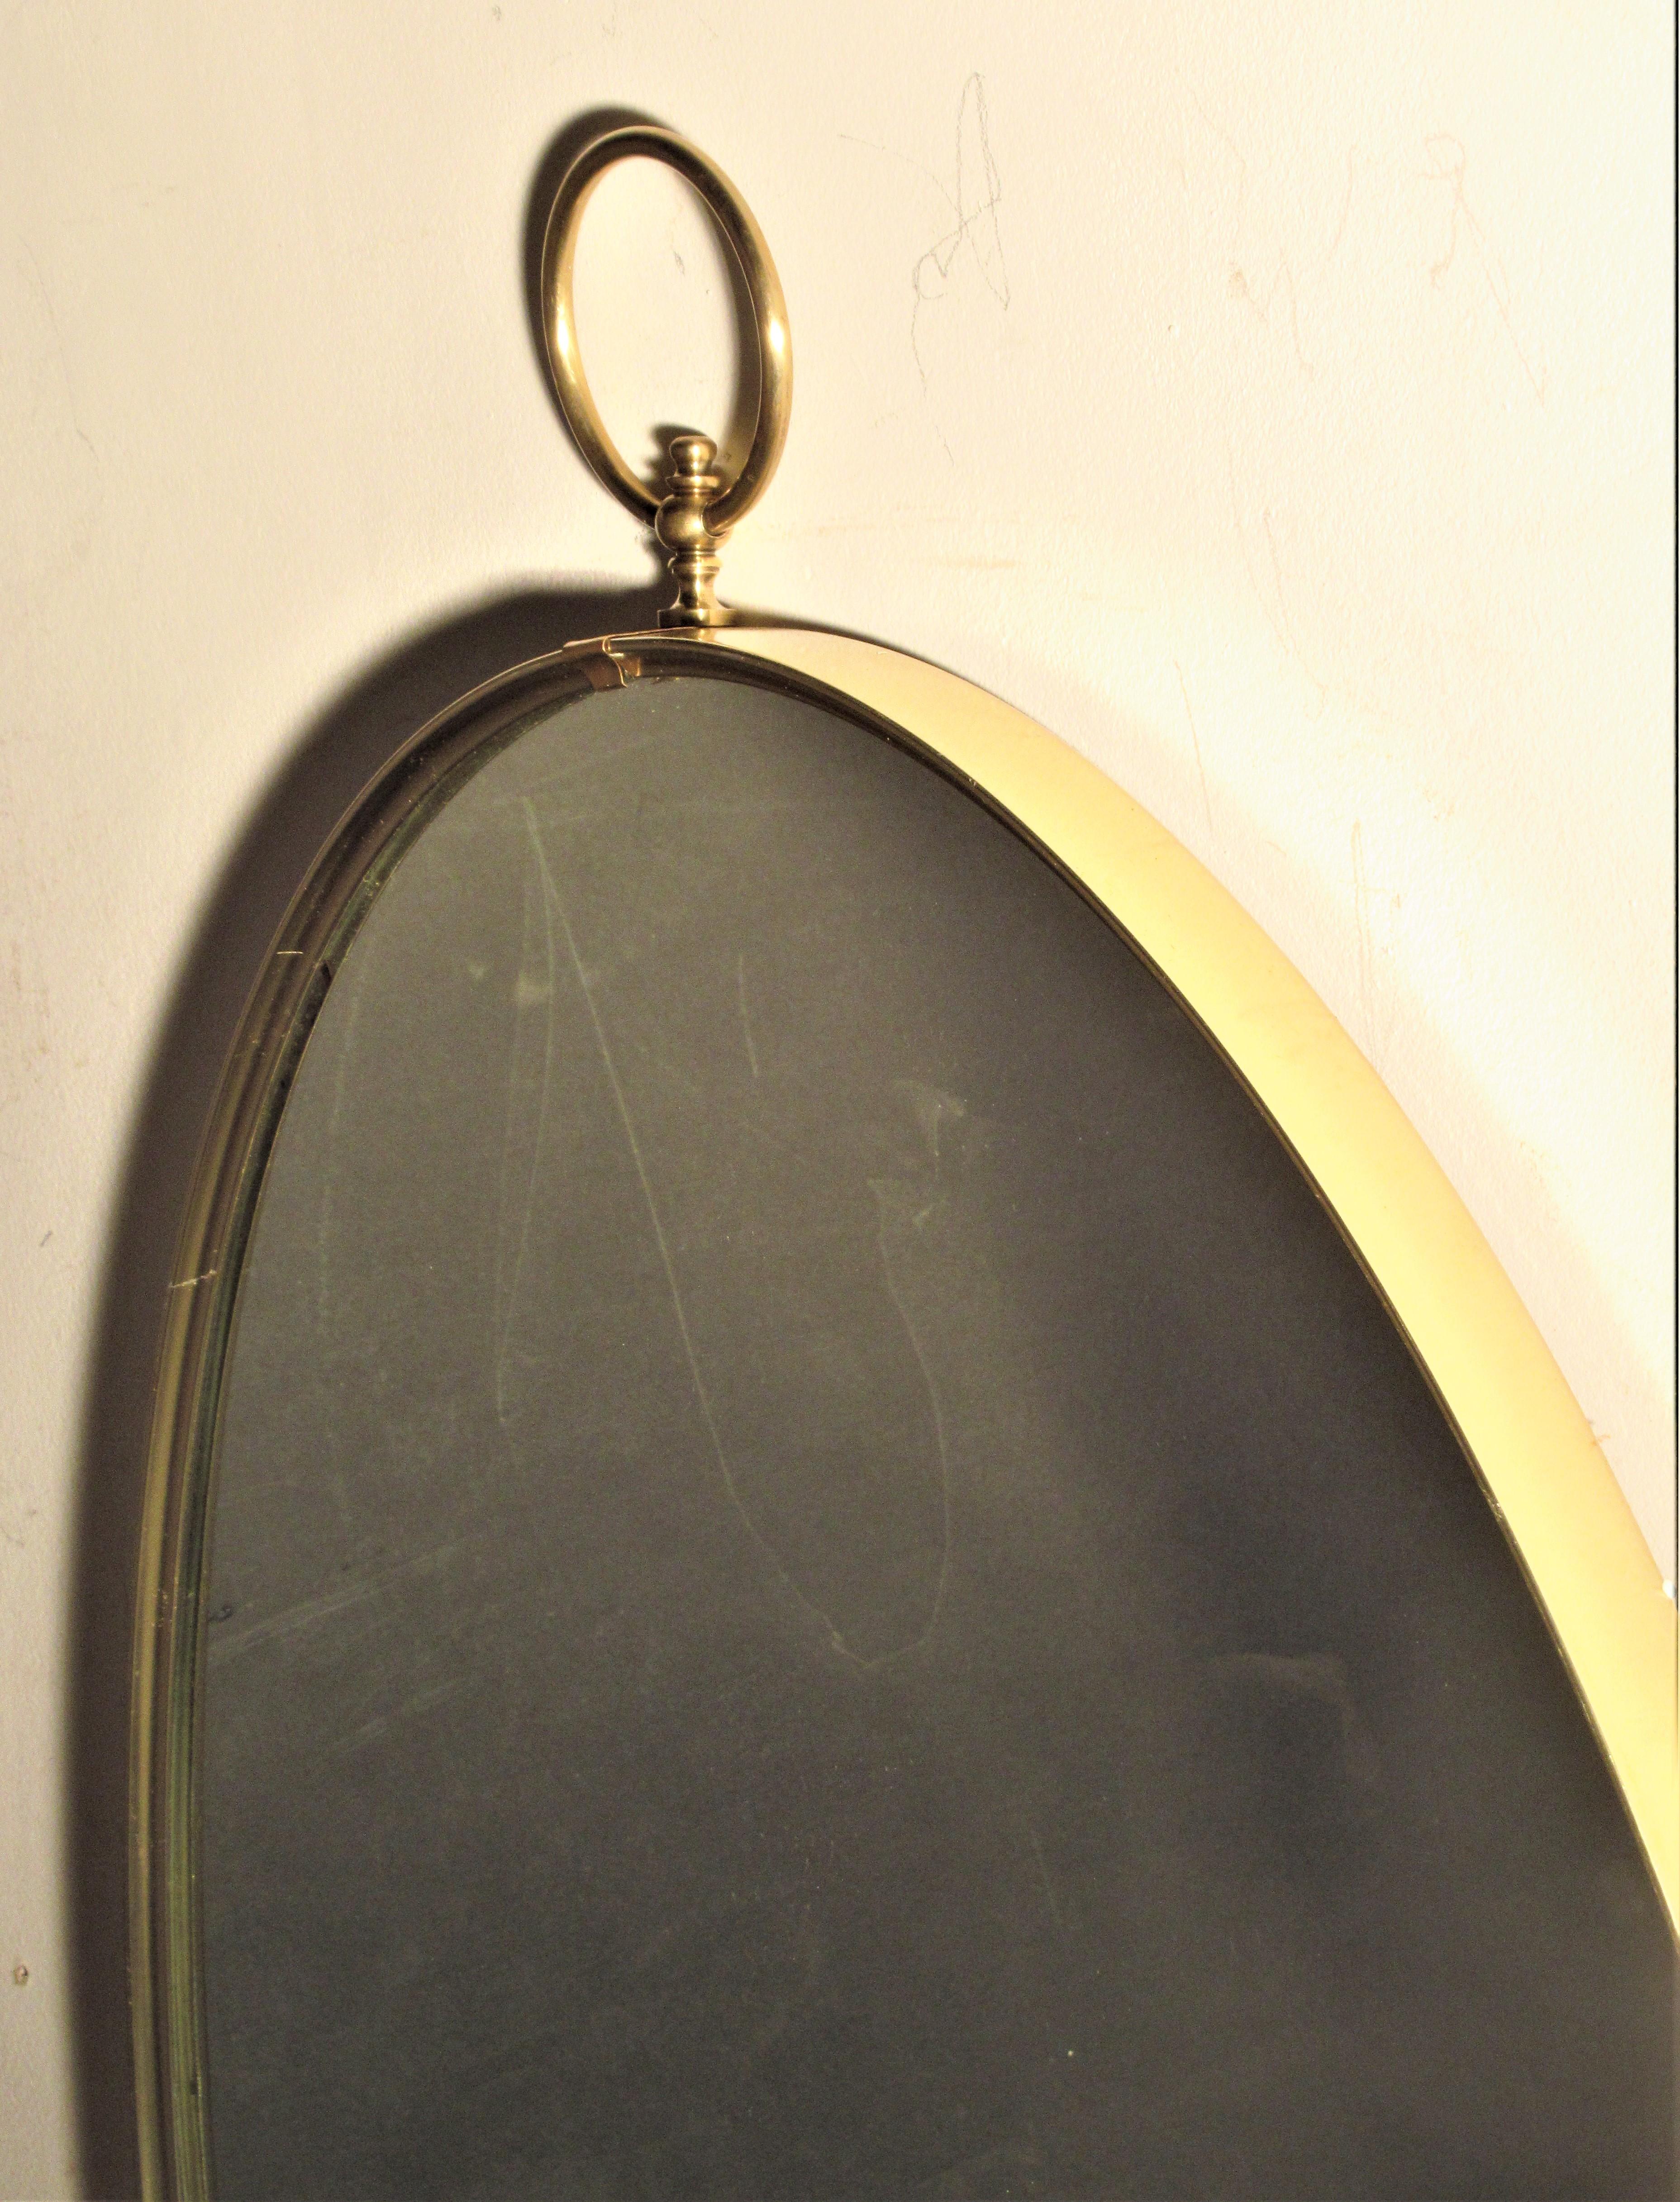 Oval brass mirror with large ring top center of frame. In the Italian modernist style of Gio Ponti, circa 1950-1960. Look at all pictures and read condition report in comment section.